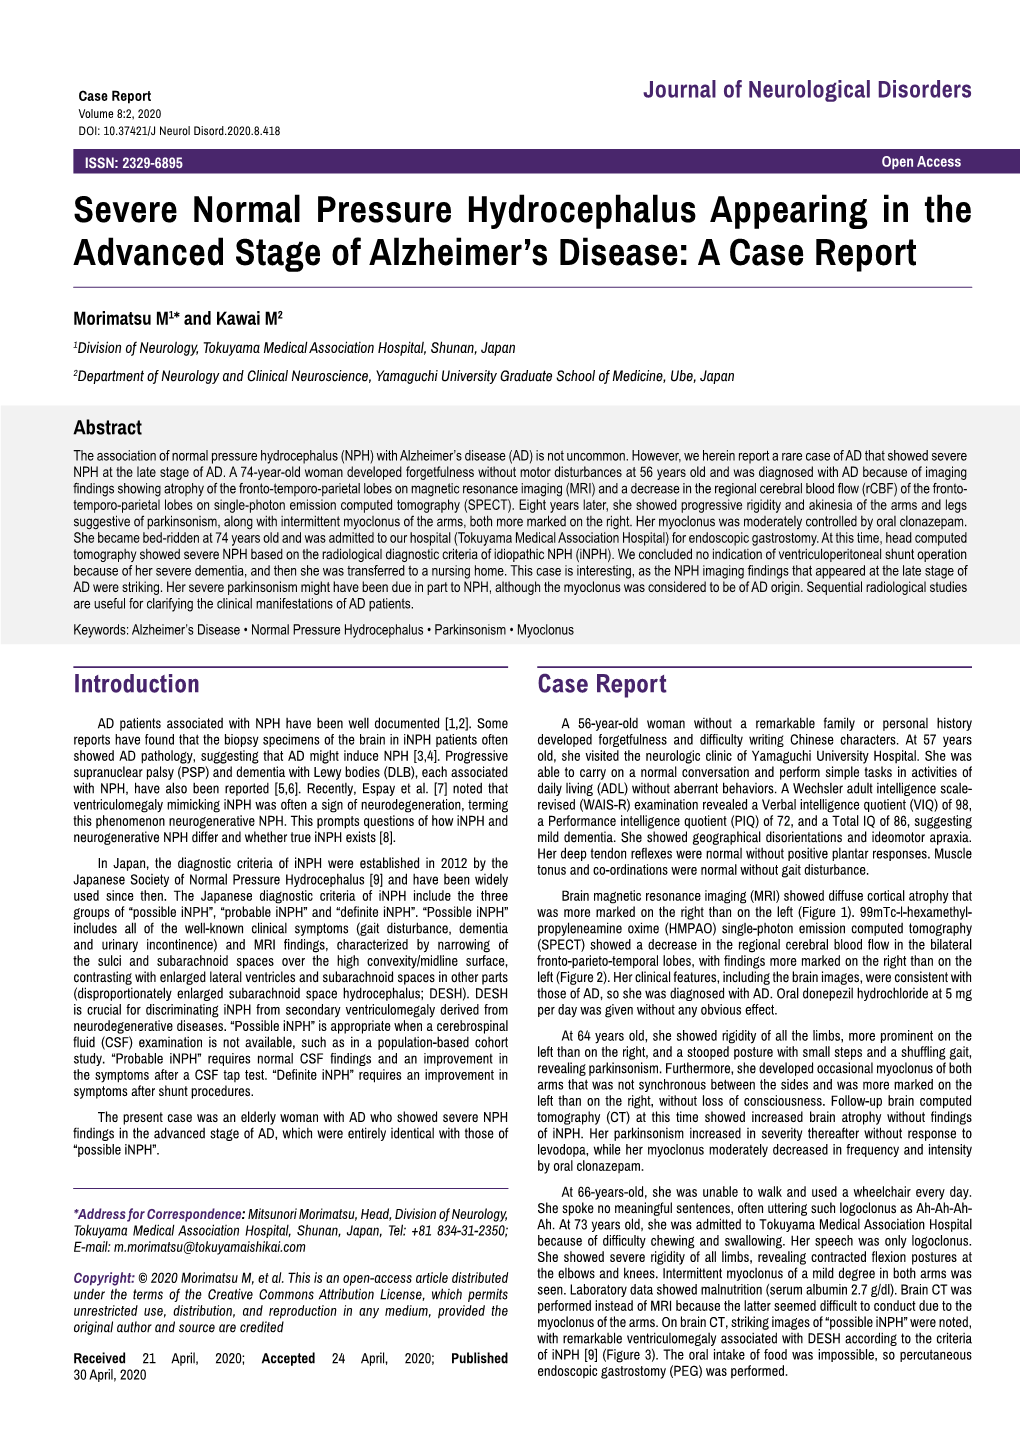 Severe Normal Pressure Hydrocephalus Appearing in the Advanced Stage of Alzheimer’S Disease: a Case Report